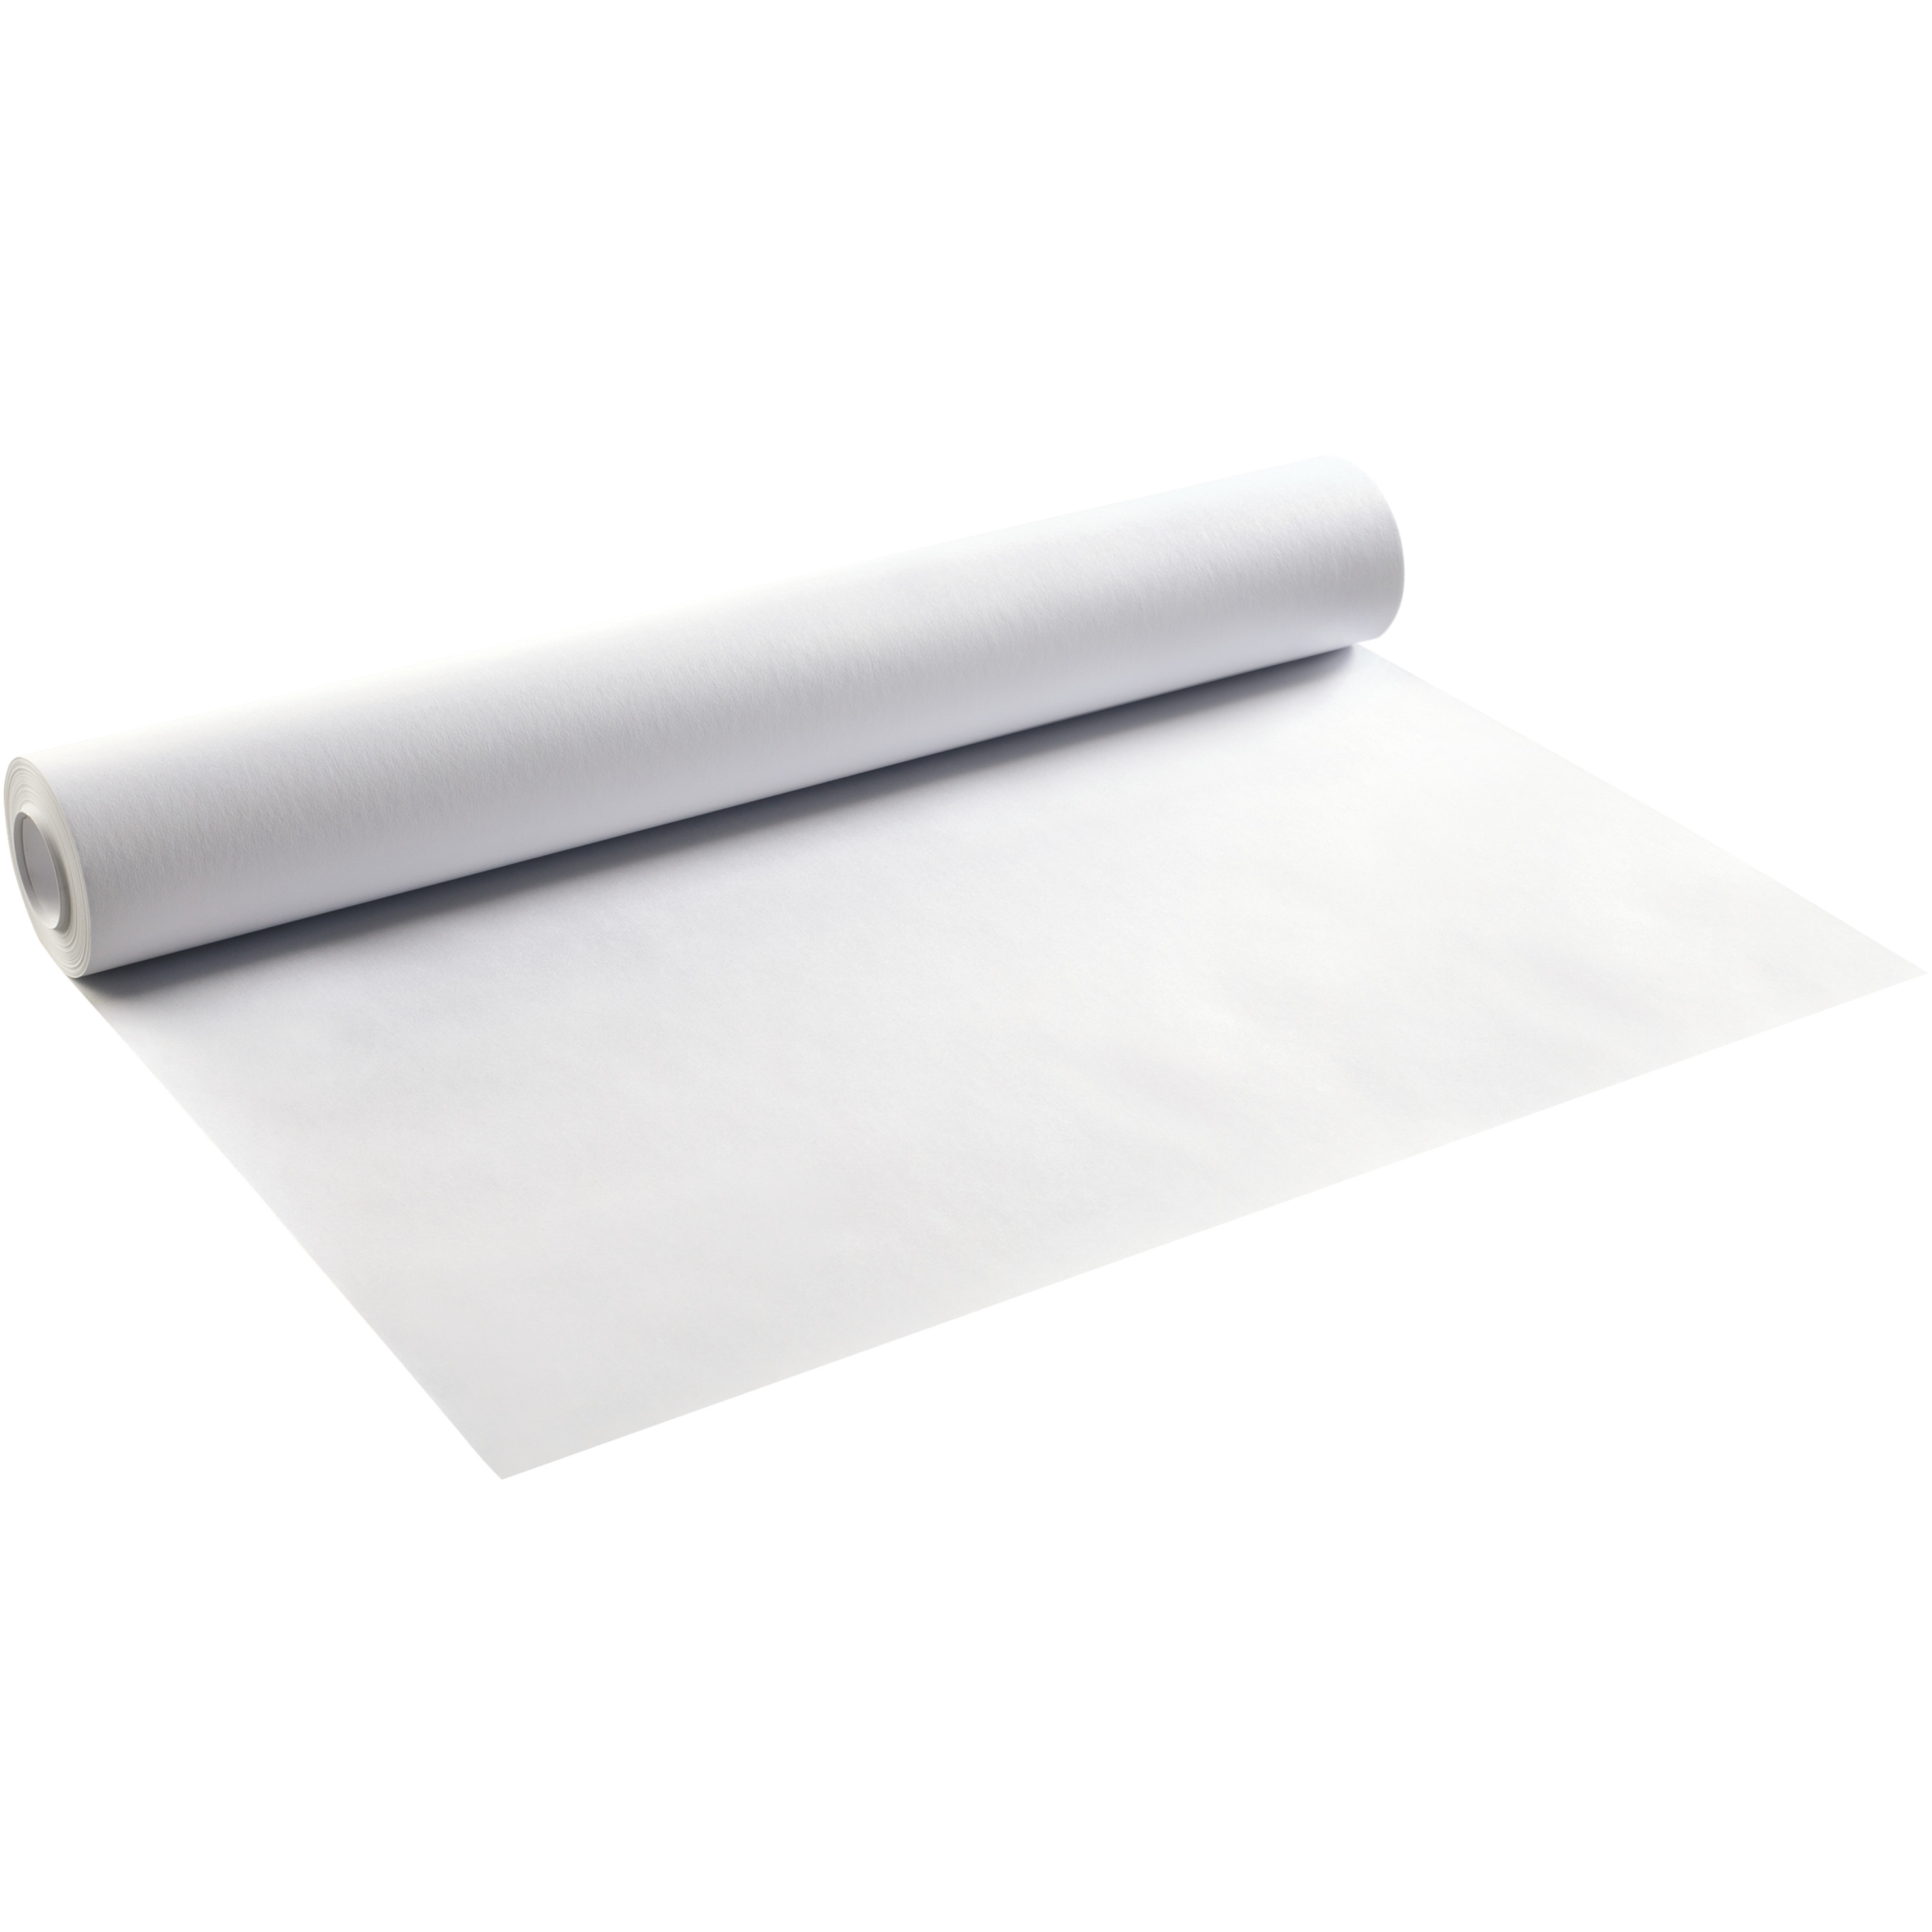 Pacon Easel Roll, 18-Inch x 75-Feet, White, 1 Roll of Paper - image 3 of 7